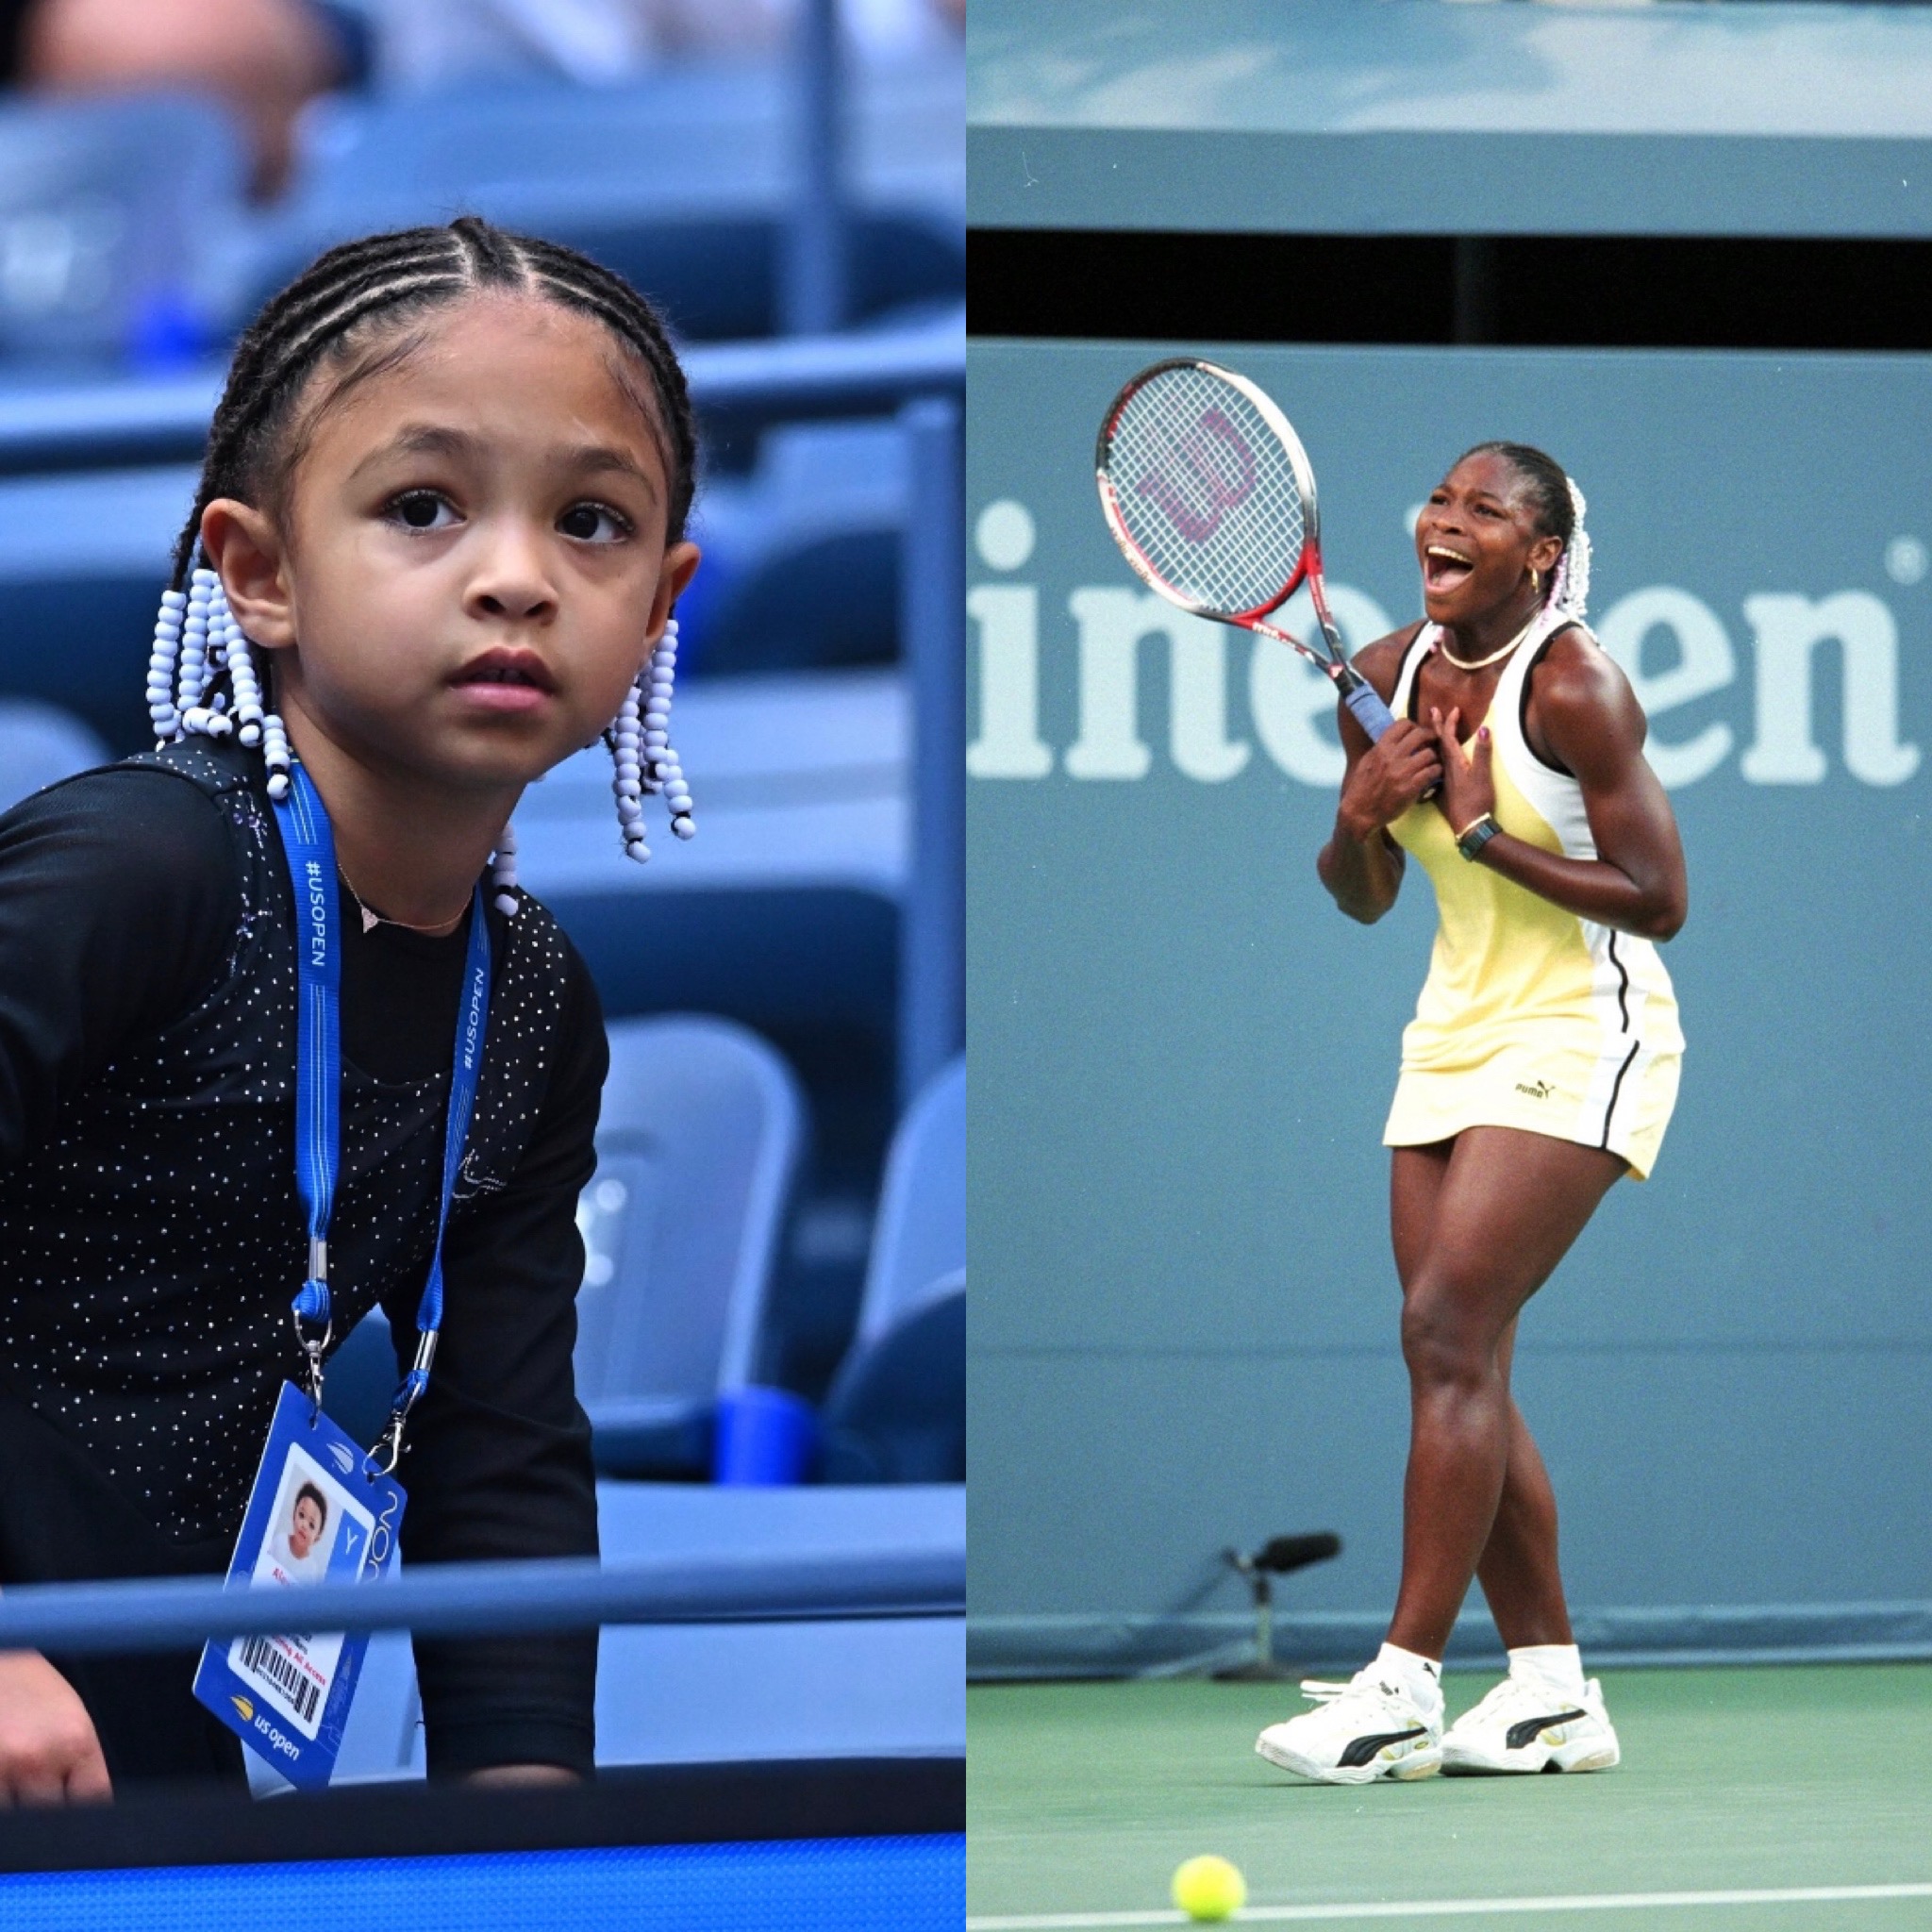 Olympia Trends Wearing The Same Iconic Beads In Her Hair Her Mom Serena ...